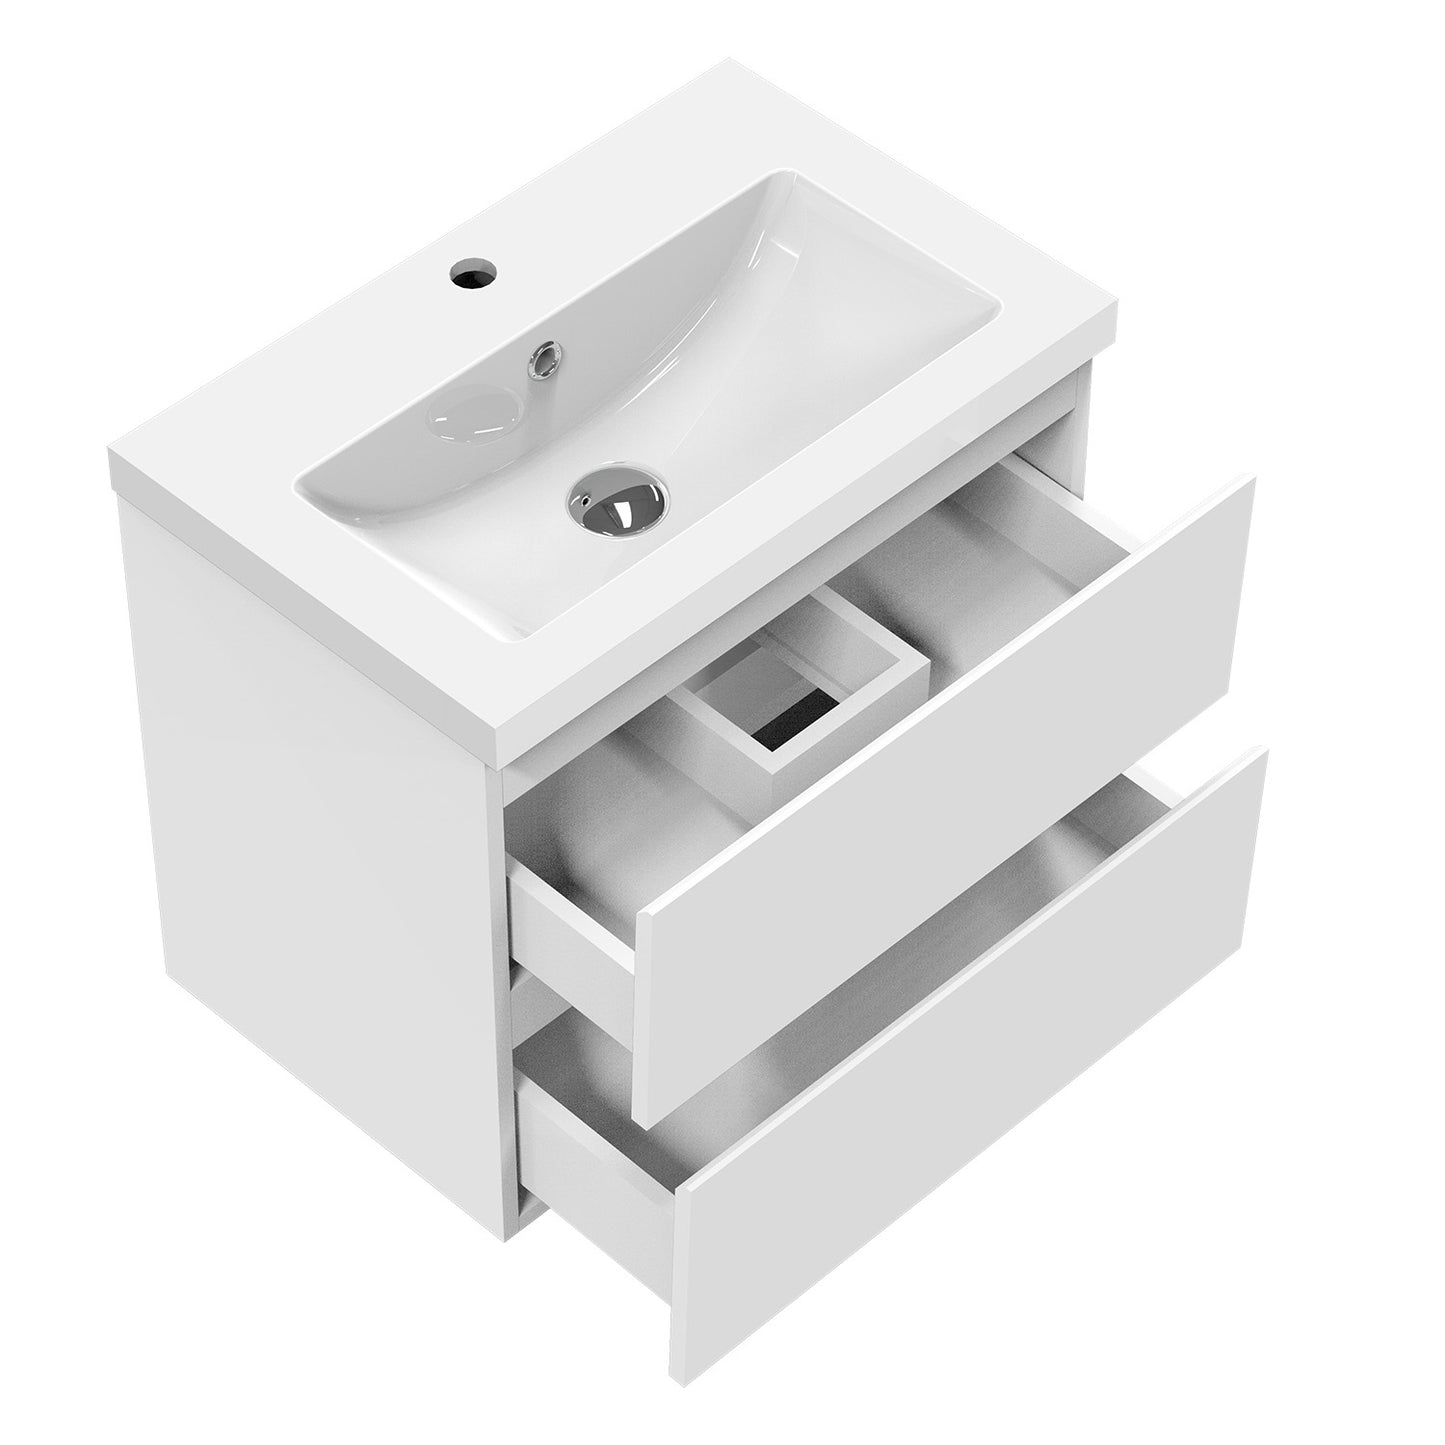 500mm white vanity unit with sink wall-mounted